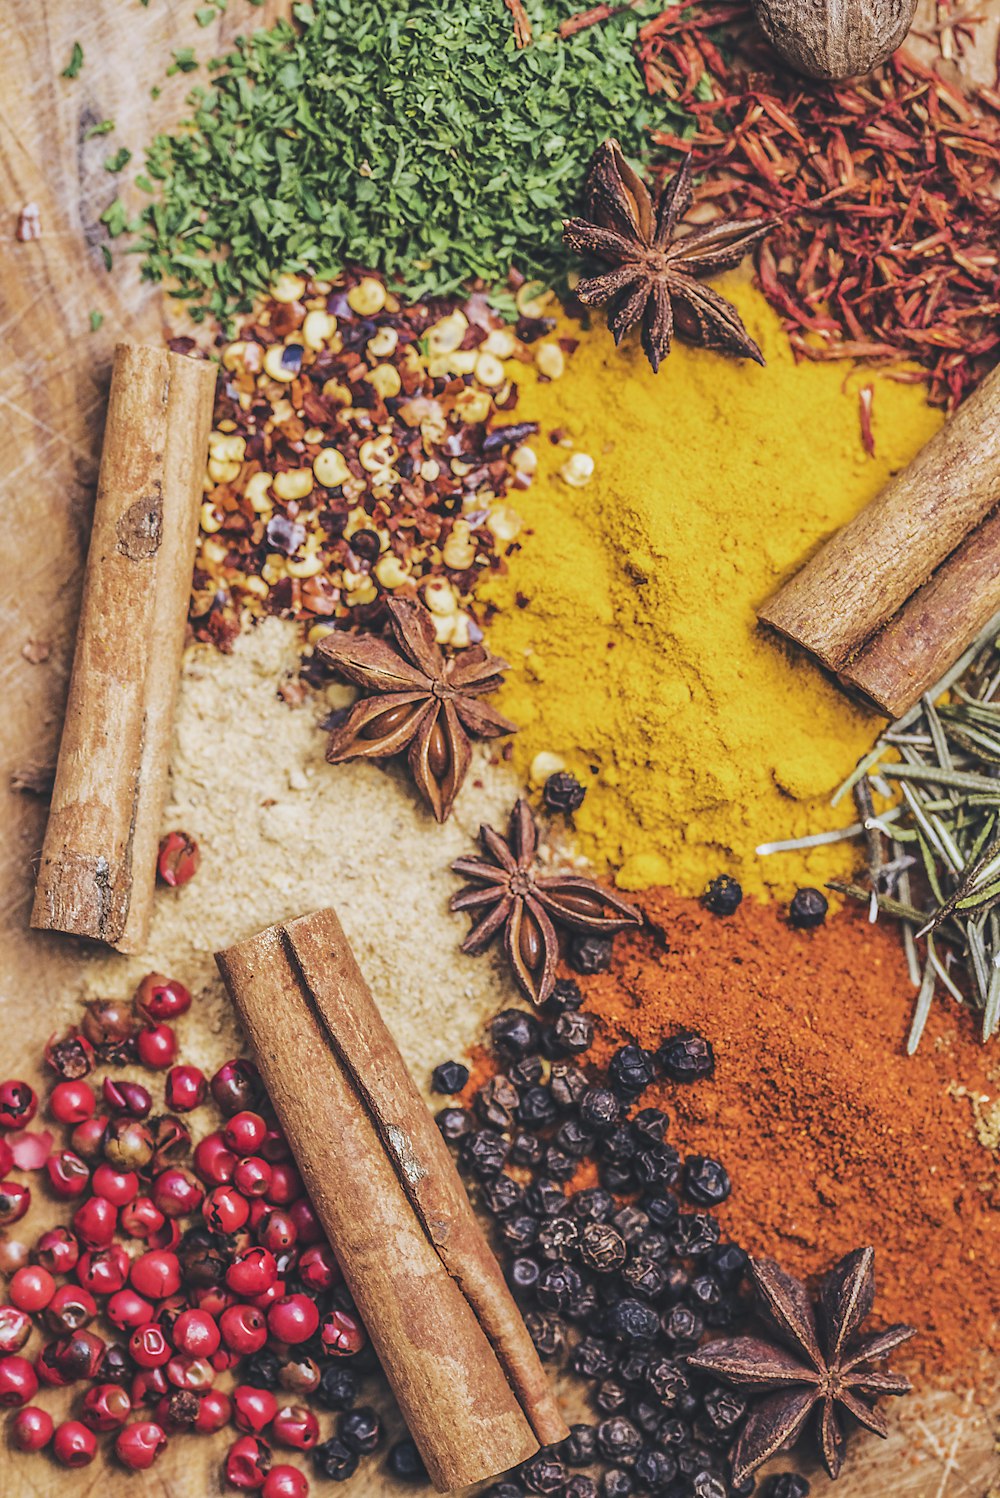 500+ Indian Spice Pictures [HD] | Download Free Images on Unsplash